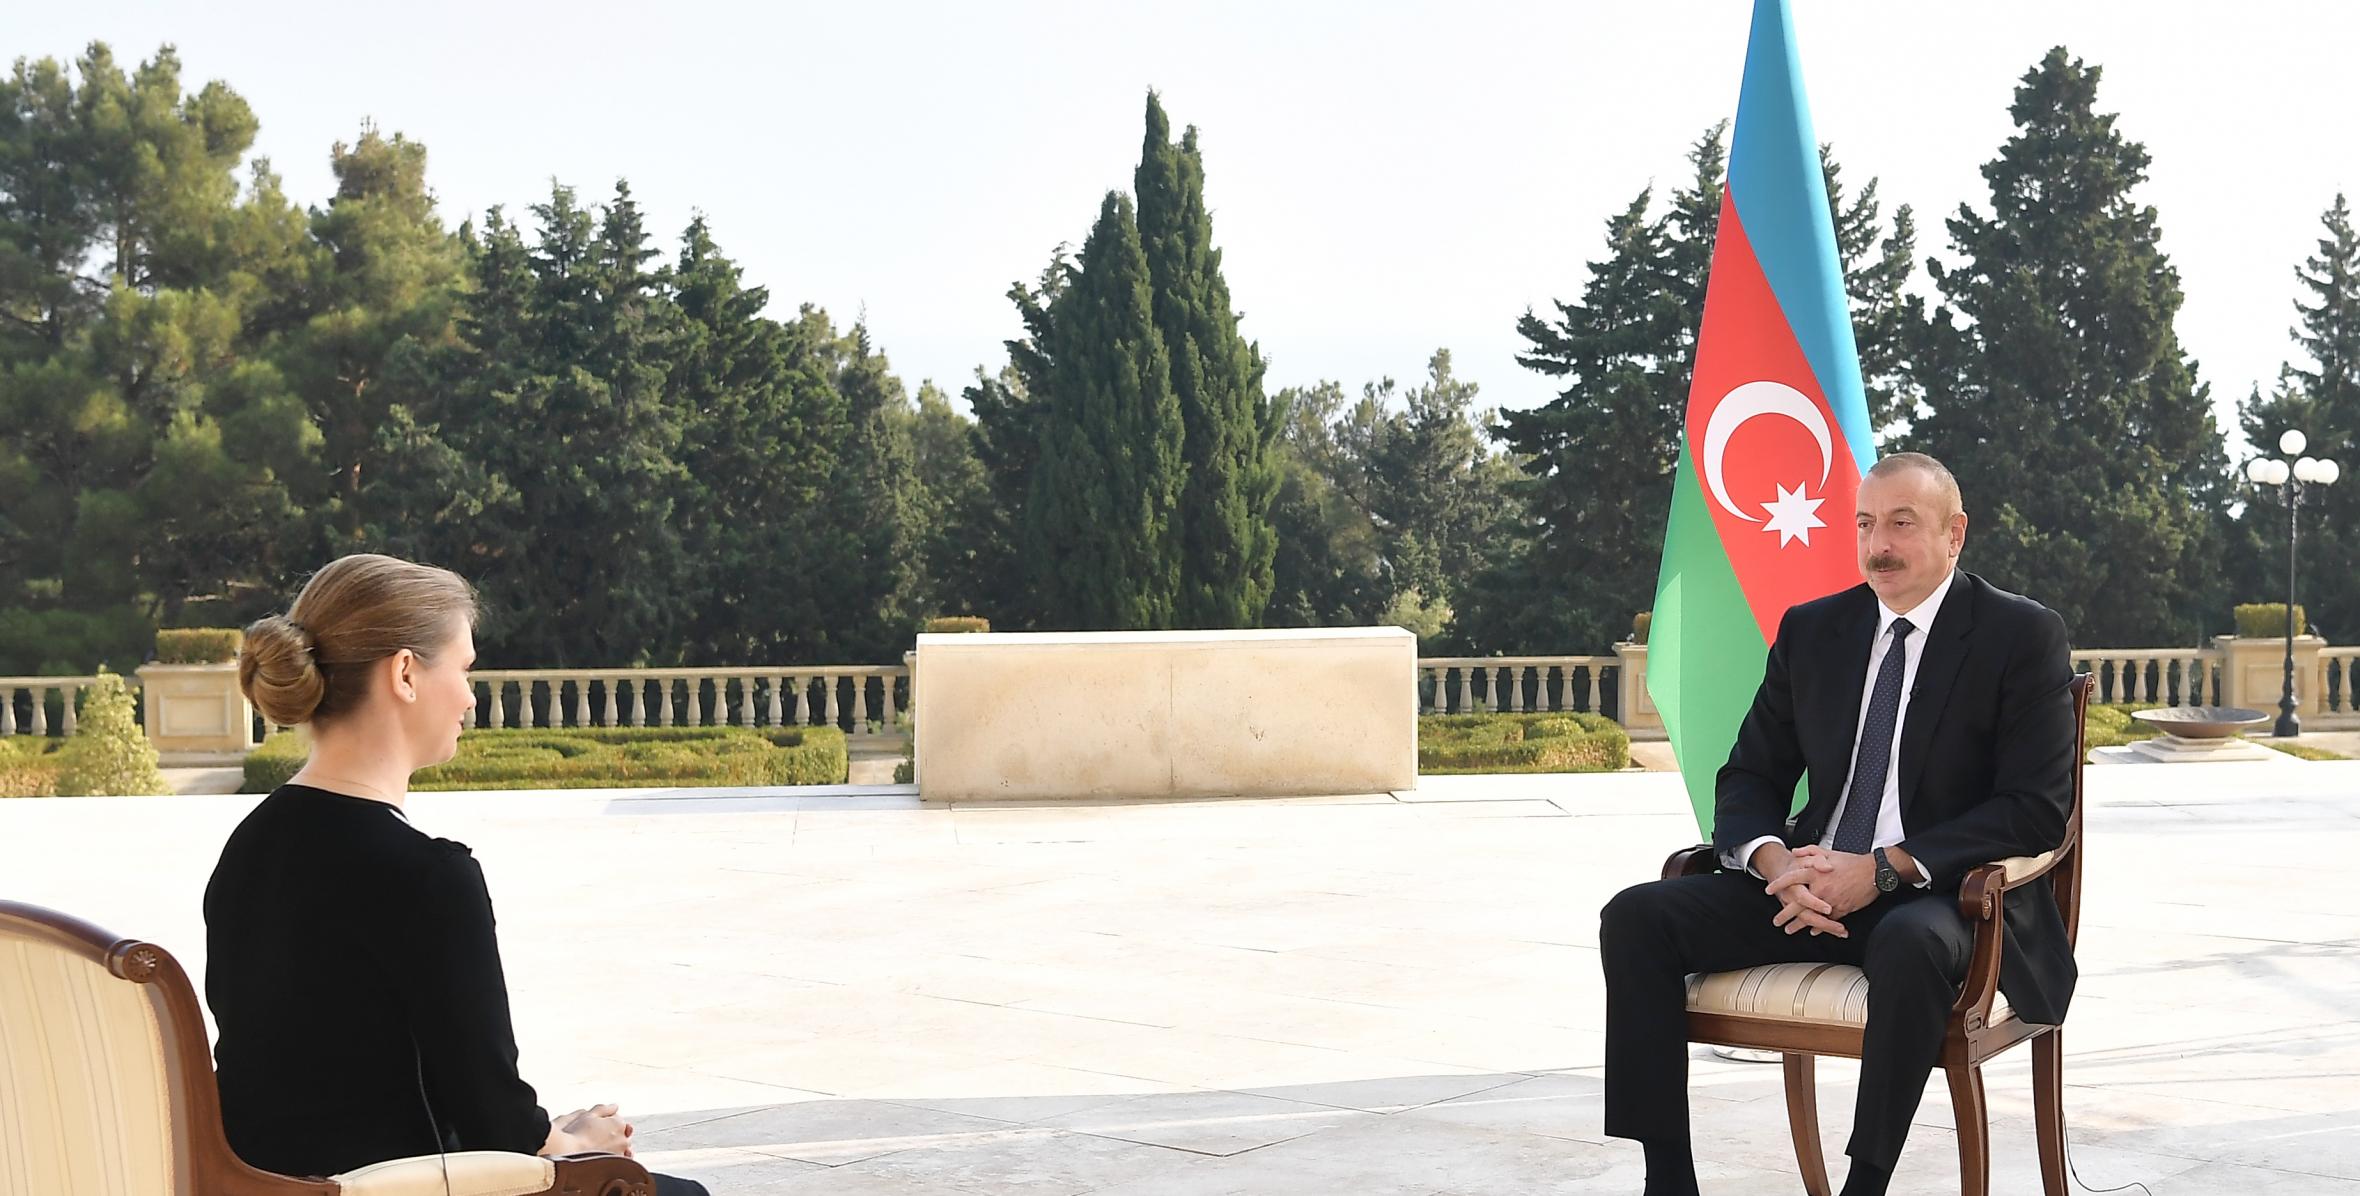 Ilham Aliyev was interviewed by Russian TASS news agency